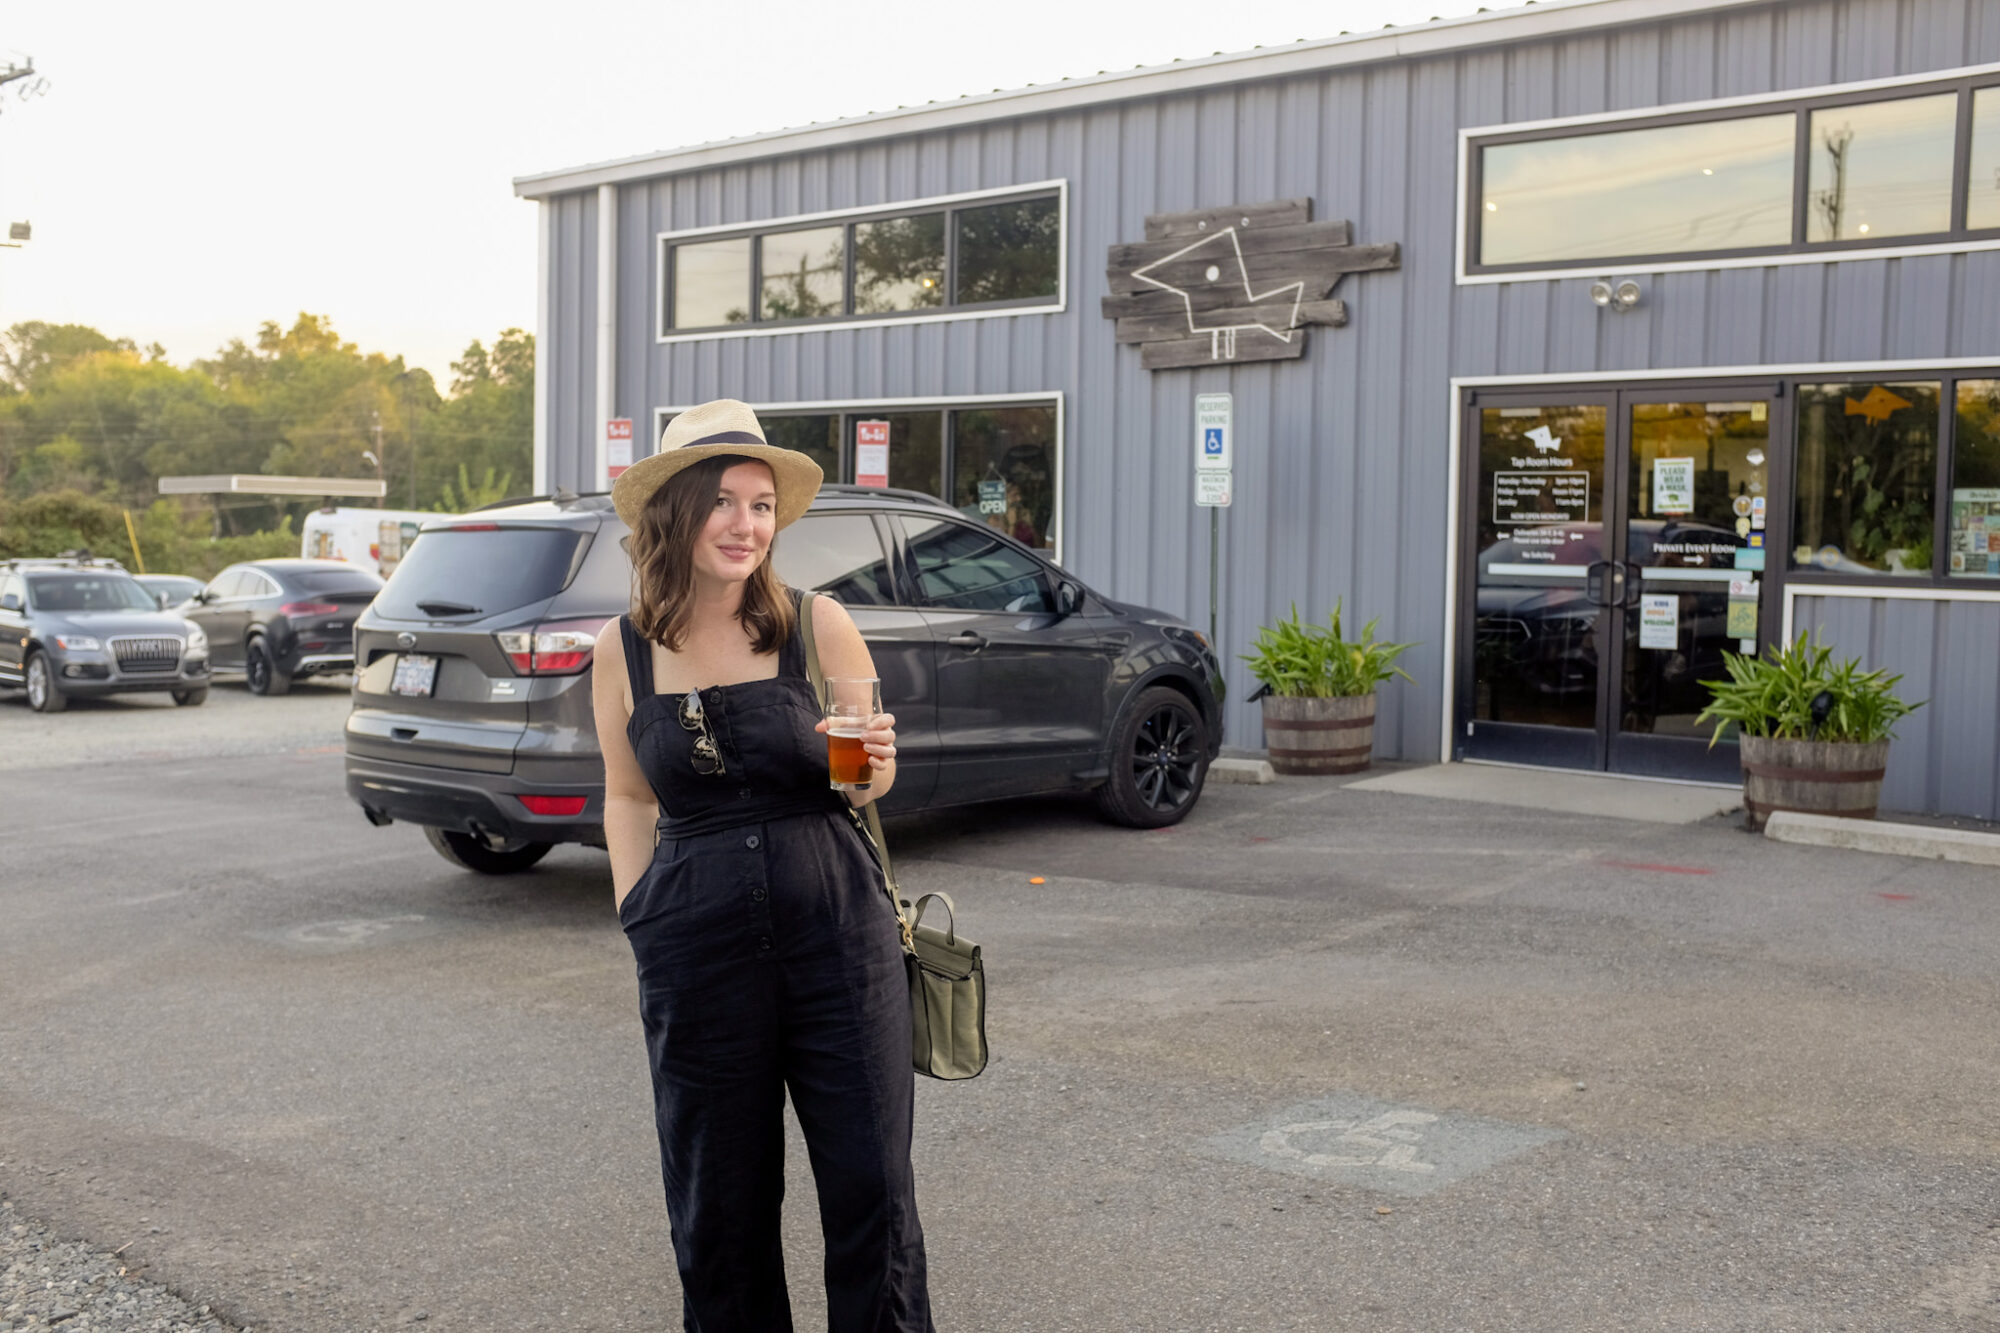 Alyssa stands outside of Birdsong Brewing with a beer